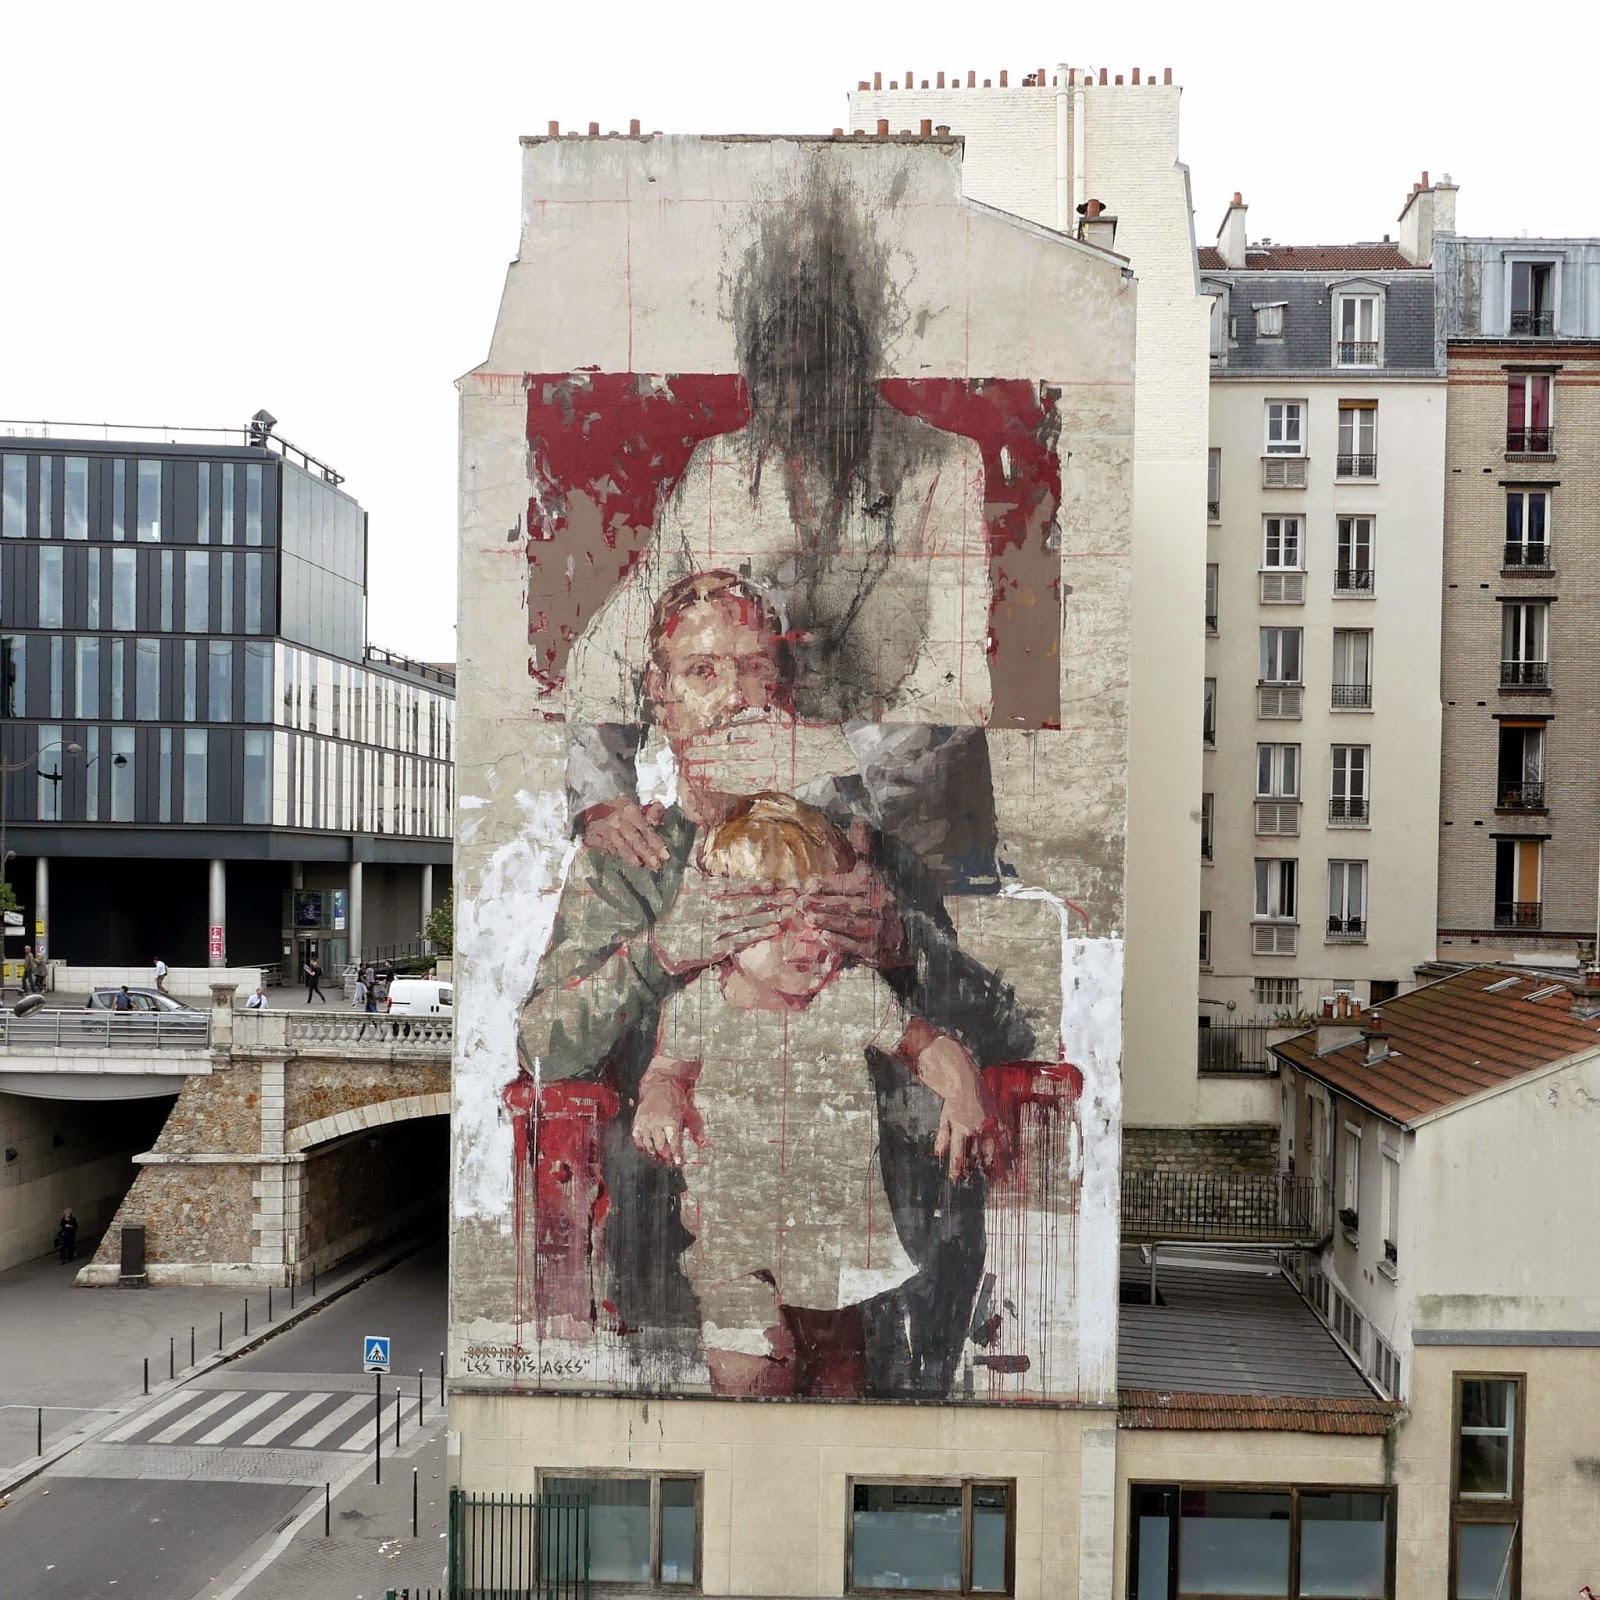 Our friend Borondo spent the last few days in Paris, France where he was invited to paint for the latest edition of the White Night.